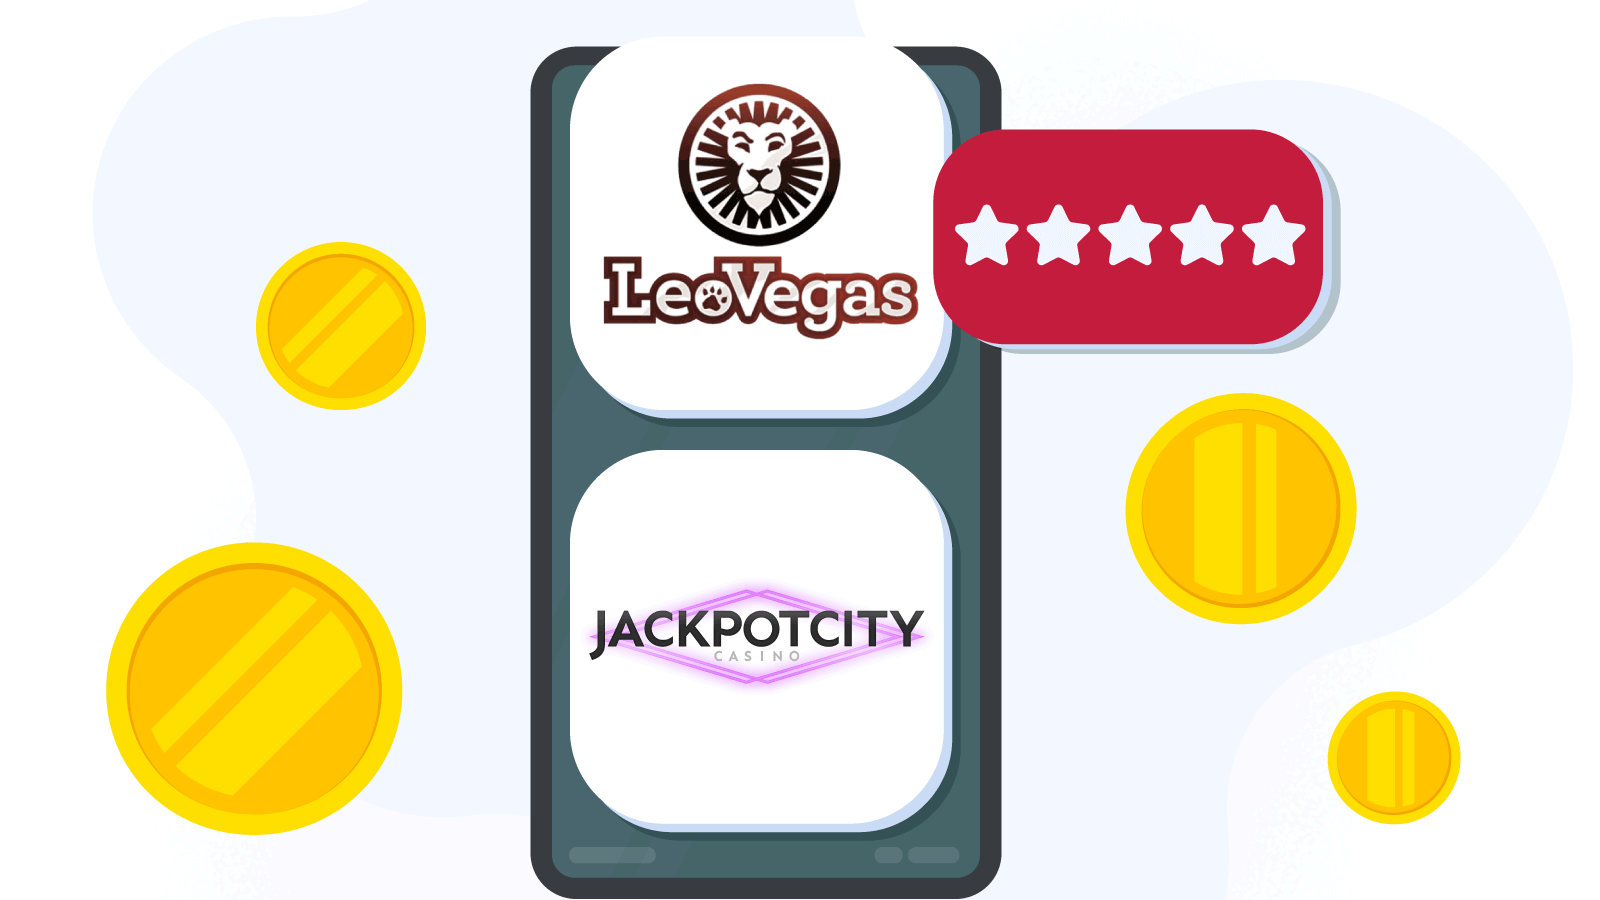 LeoVegas and JackpotCity casino are equivalent in performance